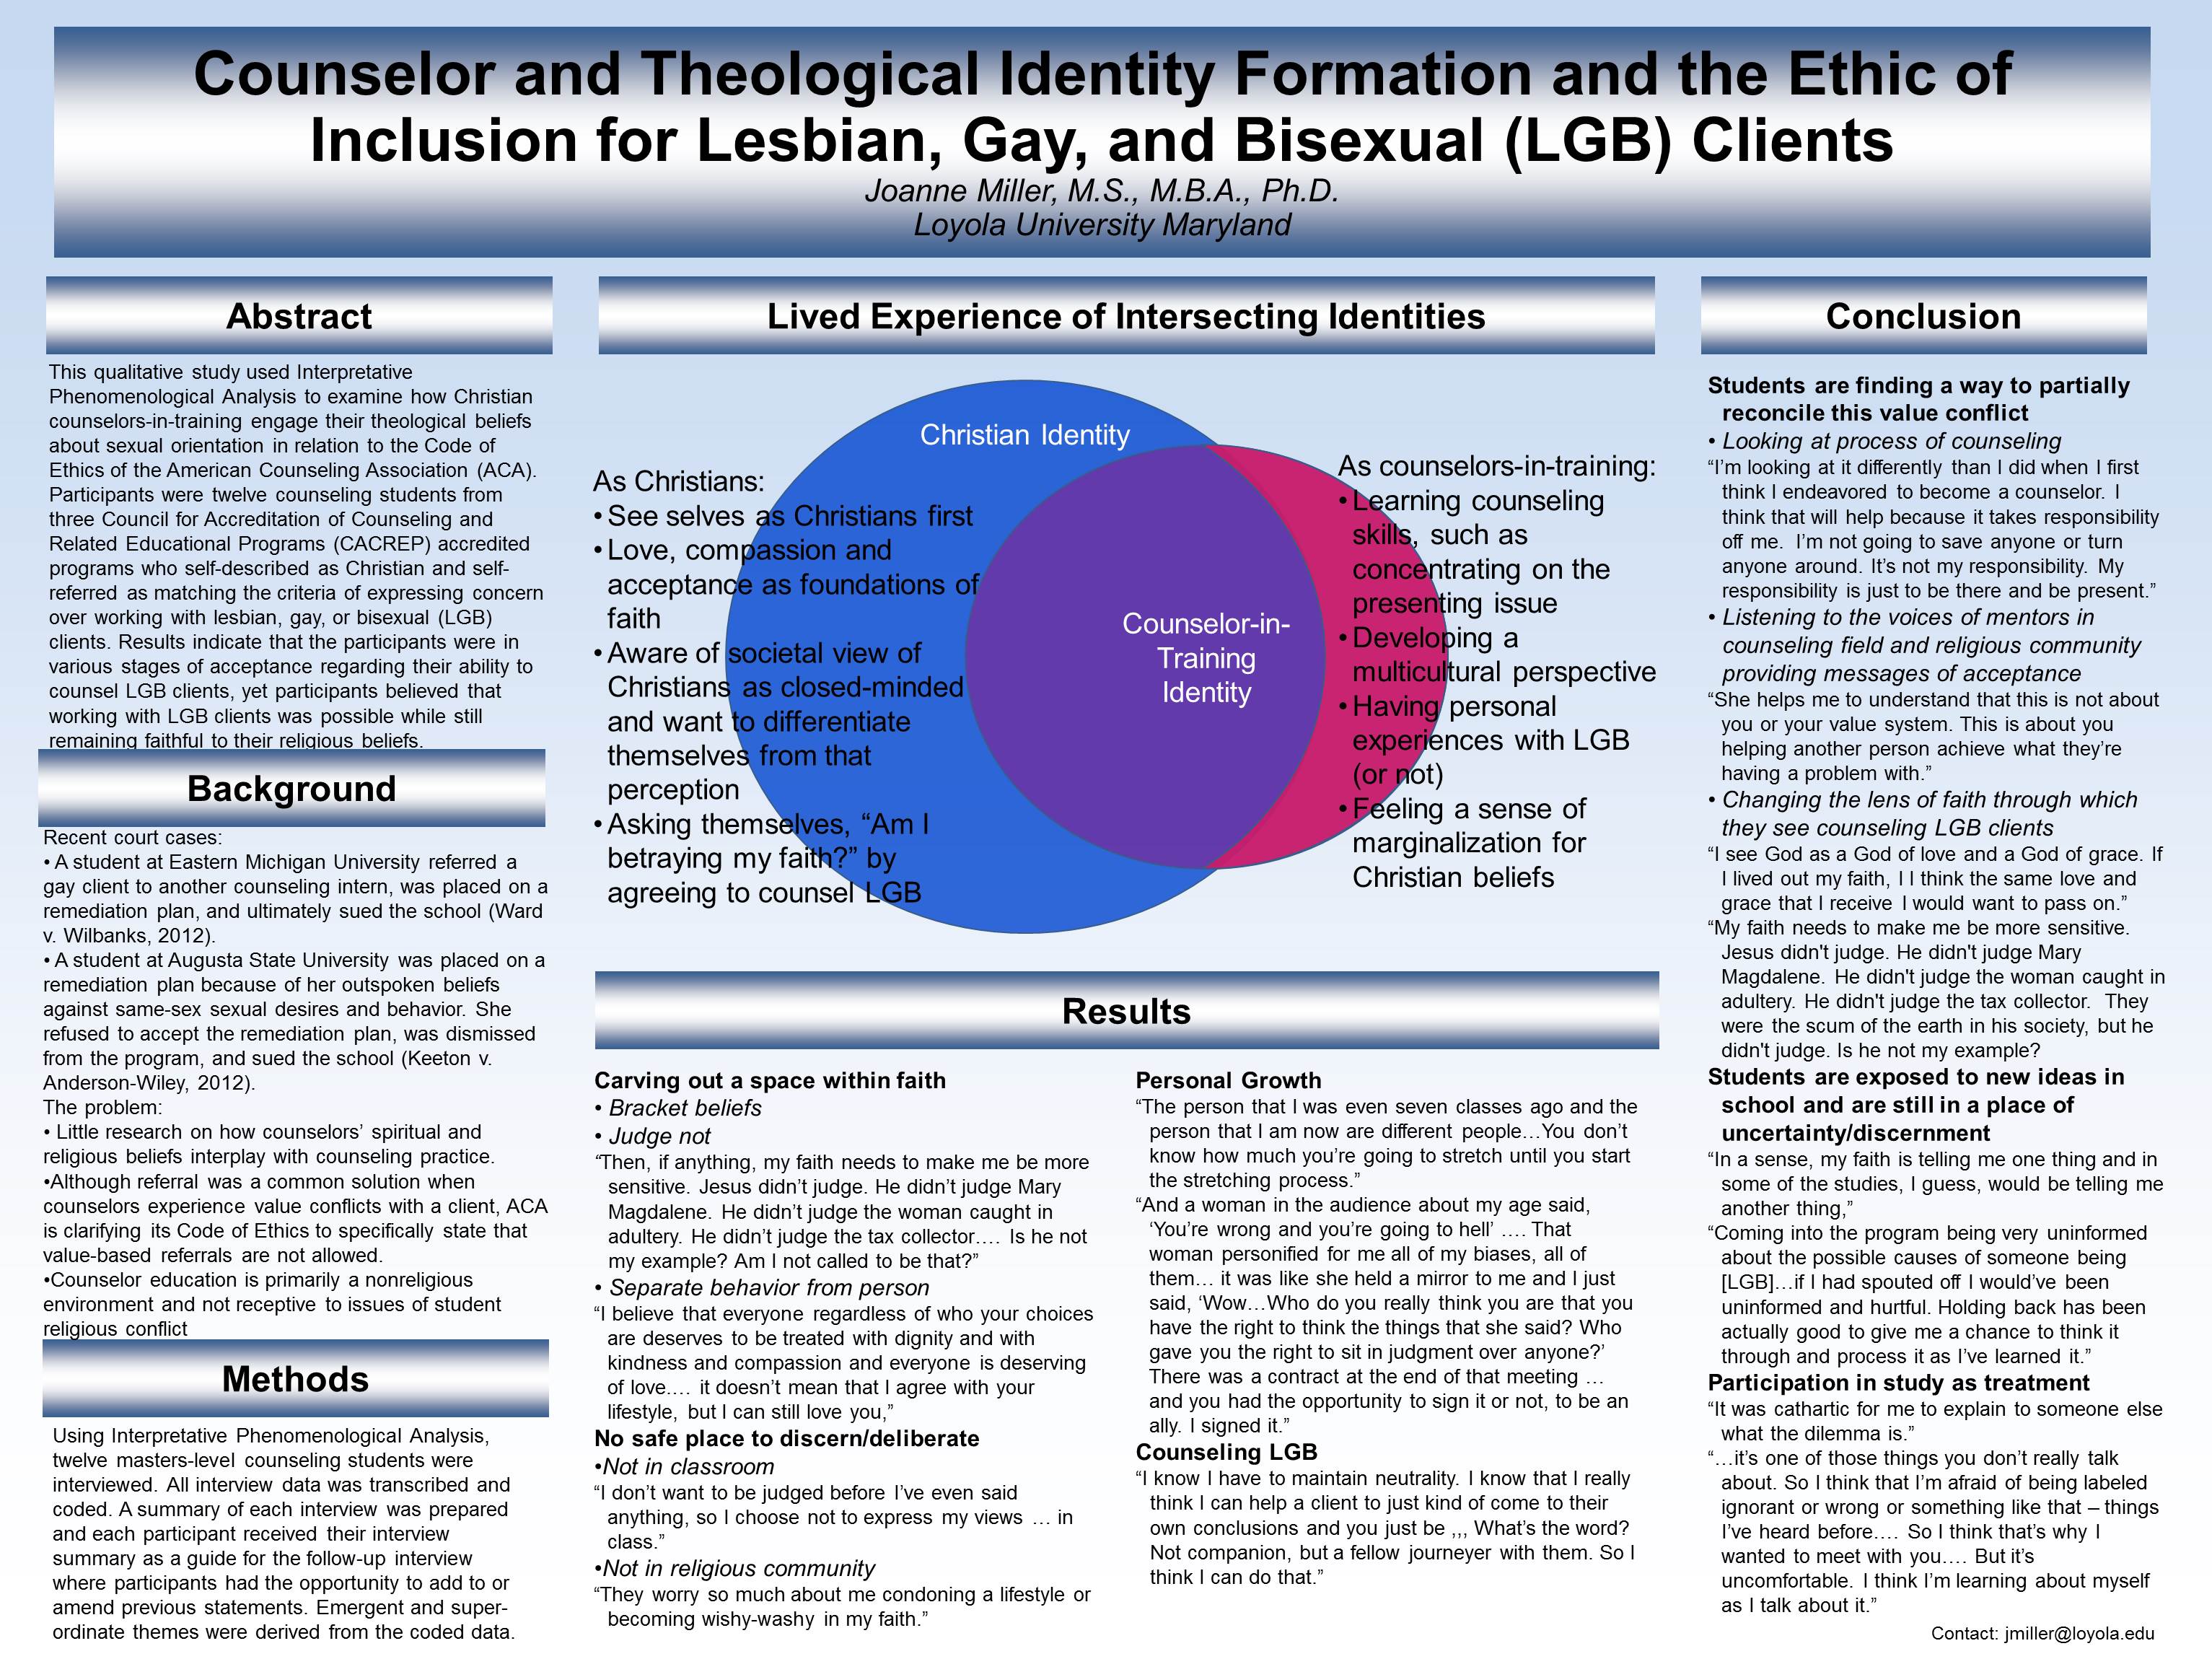 poster image: 'Counselor and Theological Identity Formation and the Ethic of Inclusion for Lesbian, Gay, and Bisexual Clients'